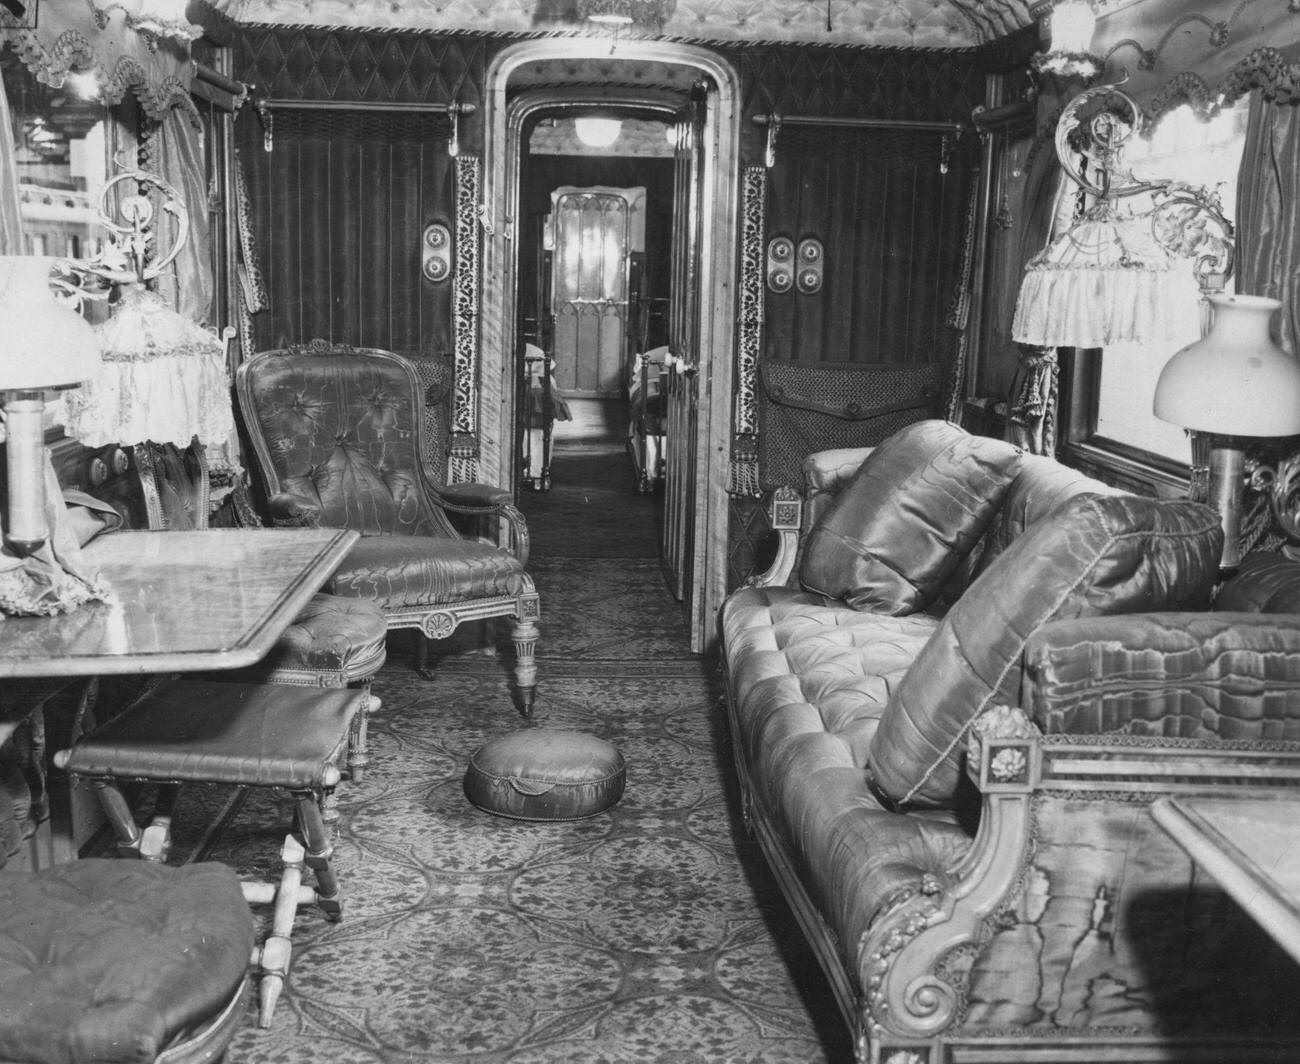 Queen Victoria's sitting room in one of the Royal coaches being displayed at a Coronation exhibition at Battersea Wharf Station, London